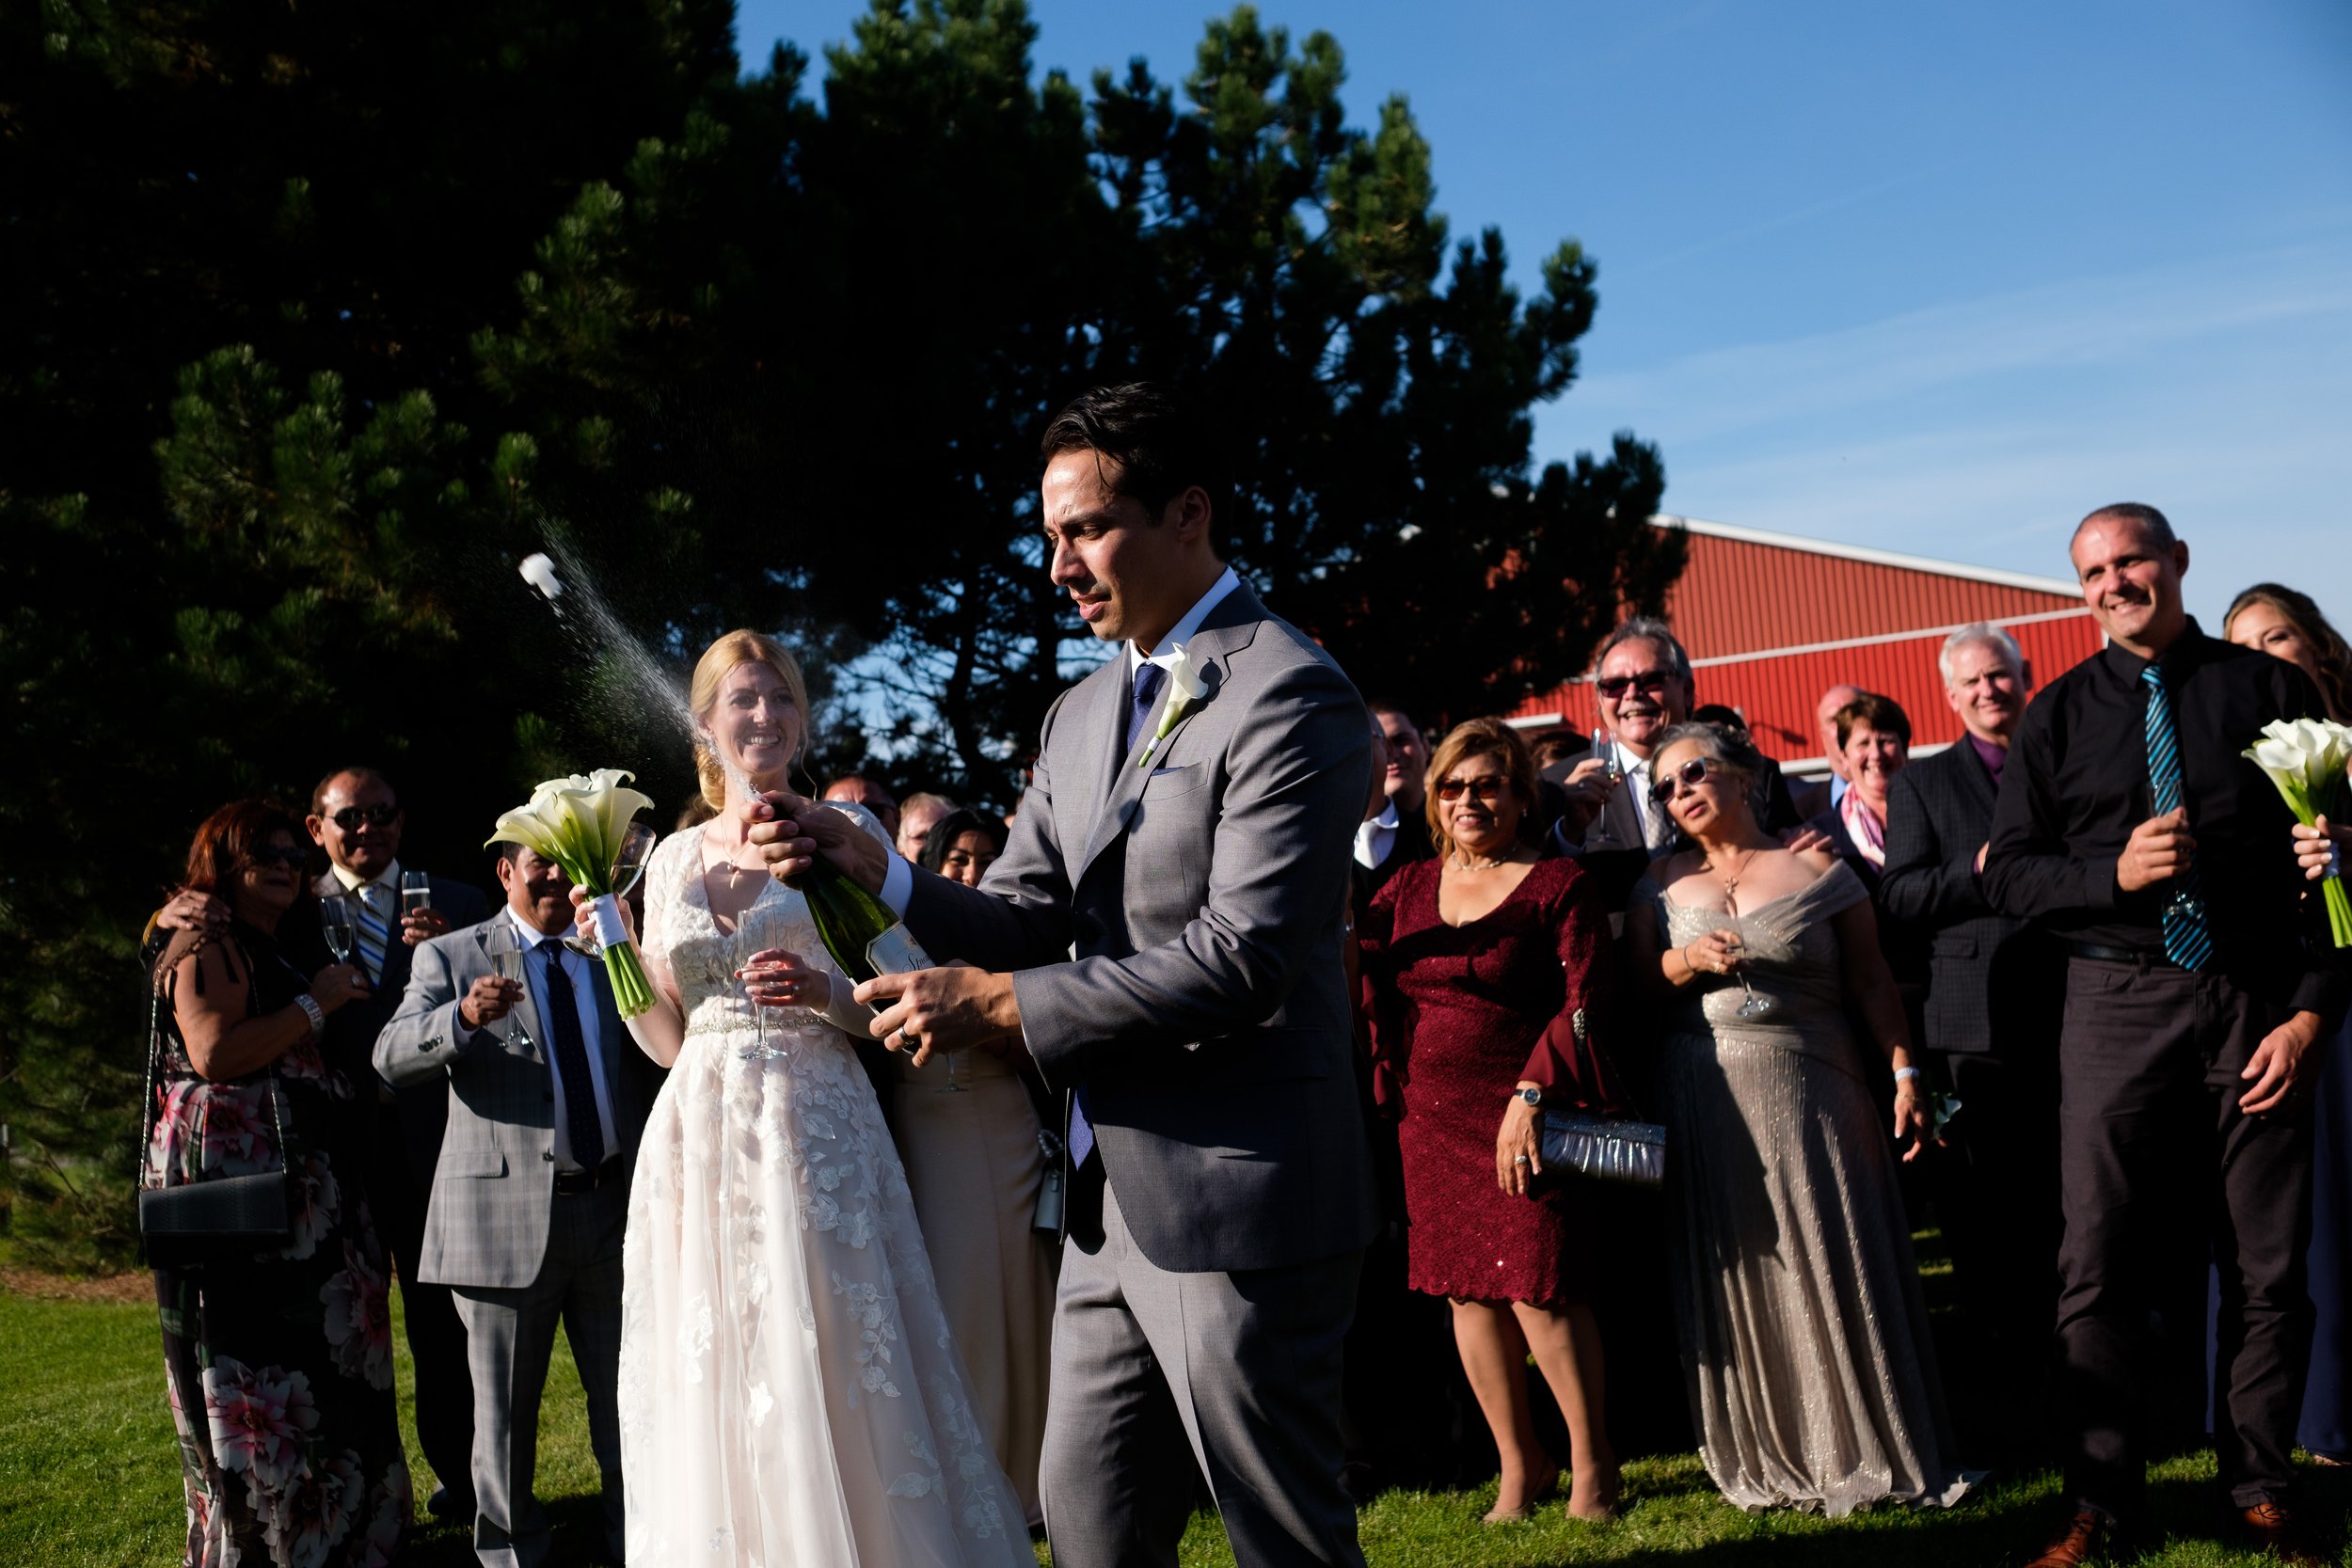  A candid colour wedding photograph after the outdoor wedding ceremony as Antony pops the champagne as the guests look on at  Cassandra and Antony’s wedding at the Hessenland Inn by Toronto wedding photographer Scott Williams. 